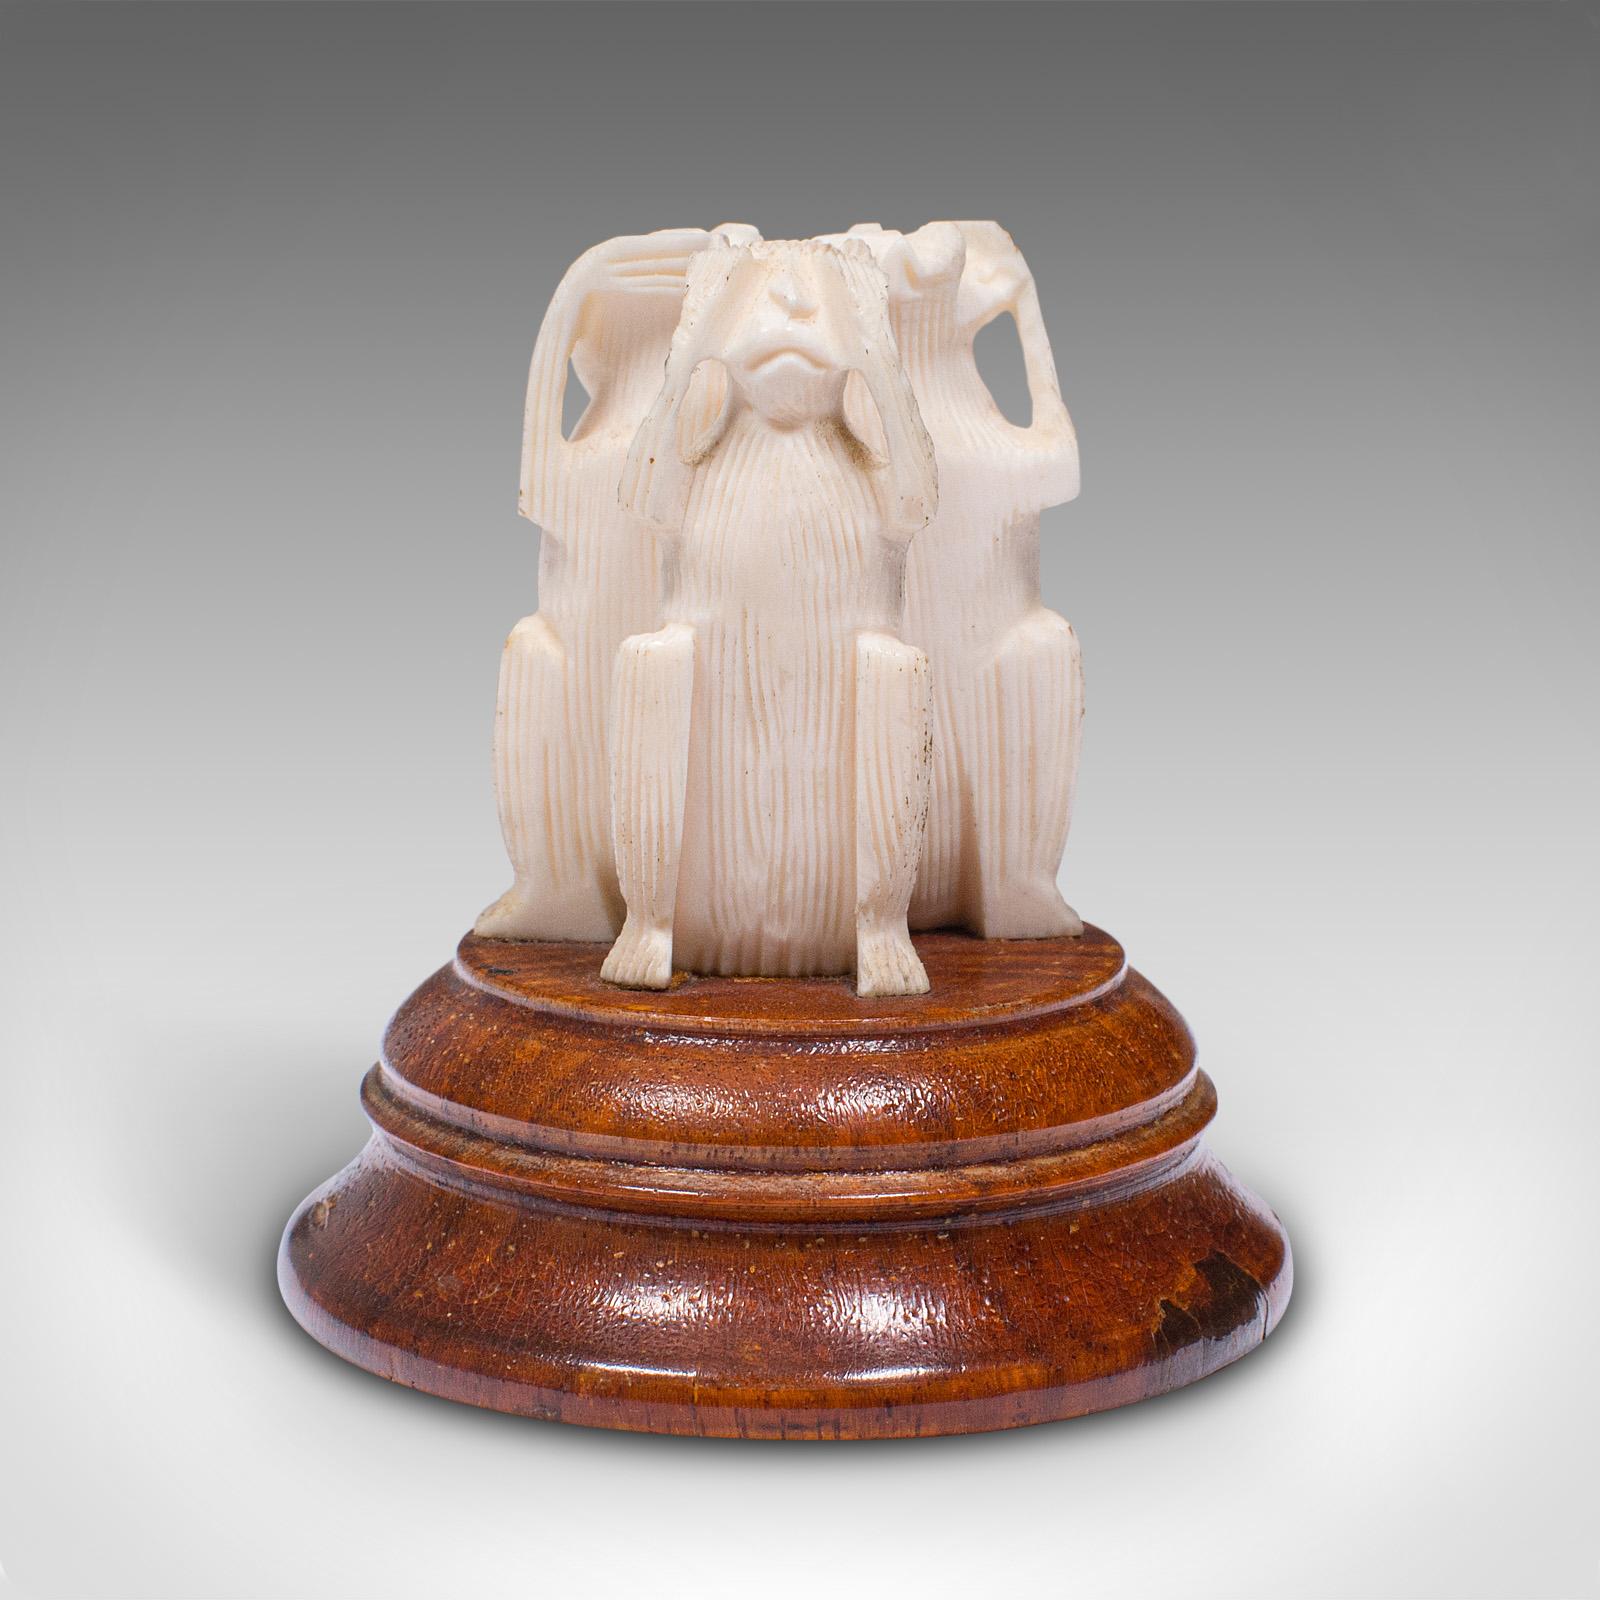 This is a vintage three wise monkeys figure. A Japanese, bone and elm ornament, dating to the late Art Deco period, circa 1940.

Charming figure of the proverbial 'See No Evil, Hear No Evil, Speak no Evil'
Displays a desirable aged patina